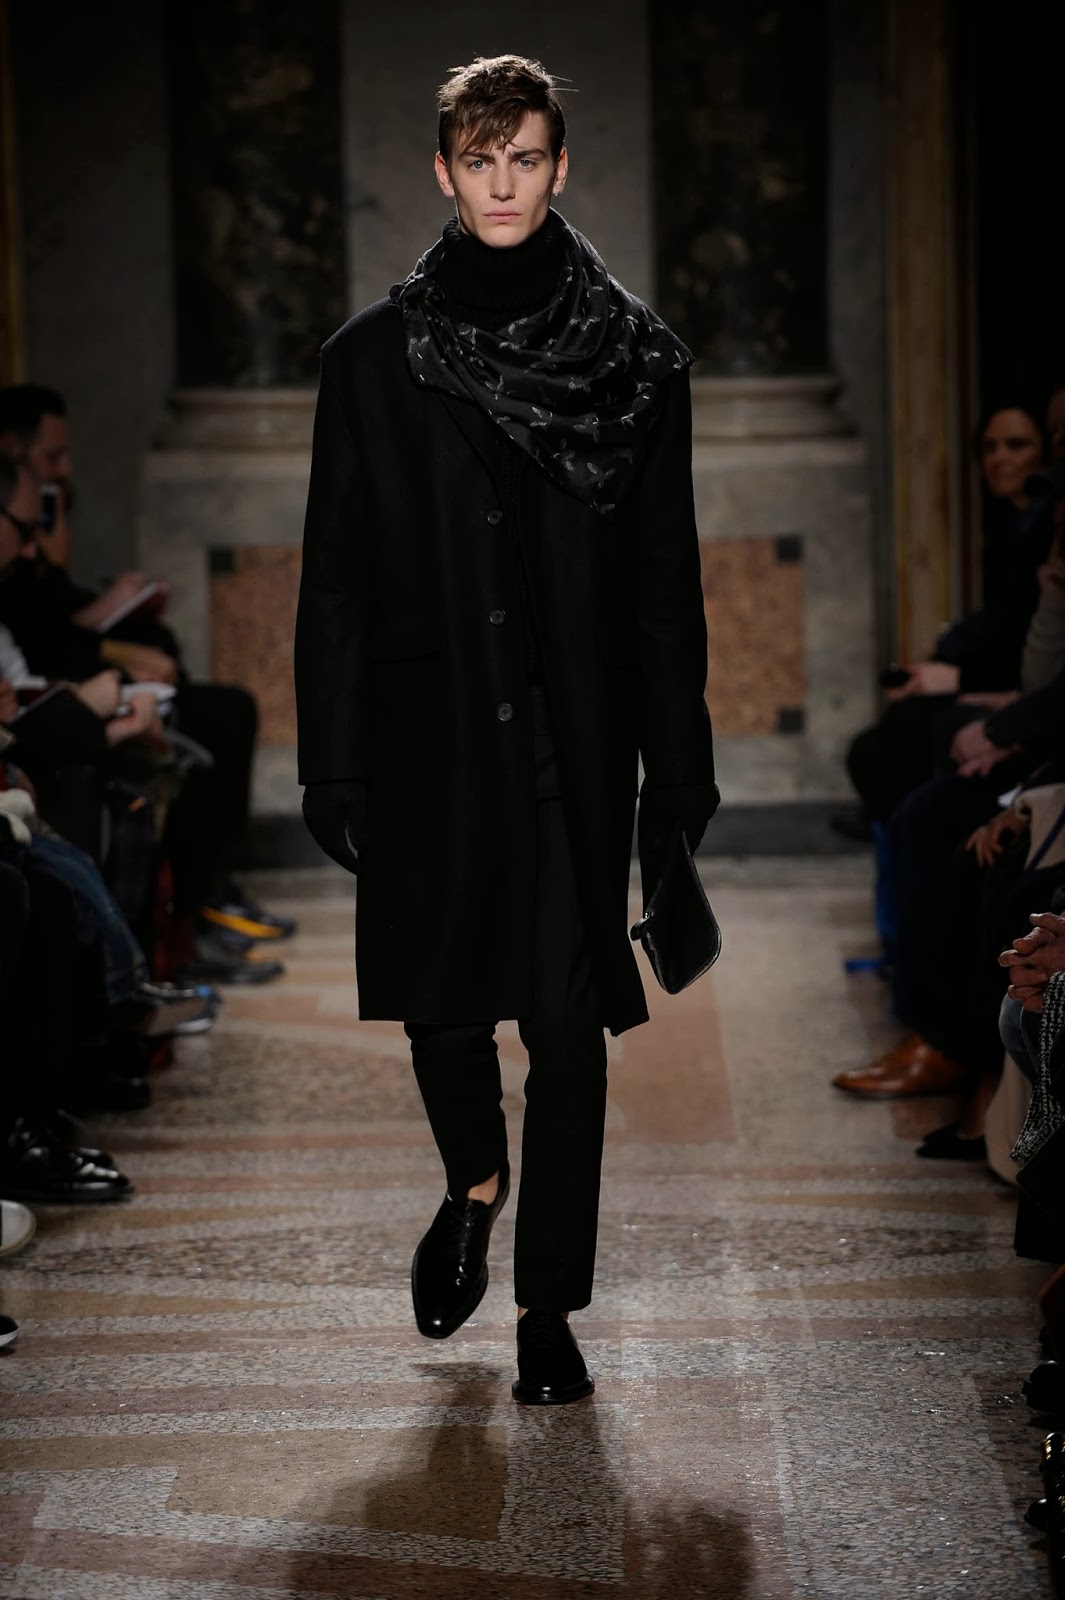 DIARY OF A CLOTHESHORSE: LES HOMMES AUTUMN - WINTER 14/15